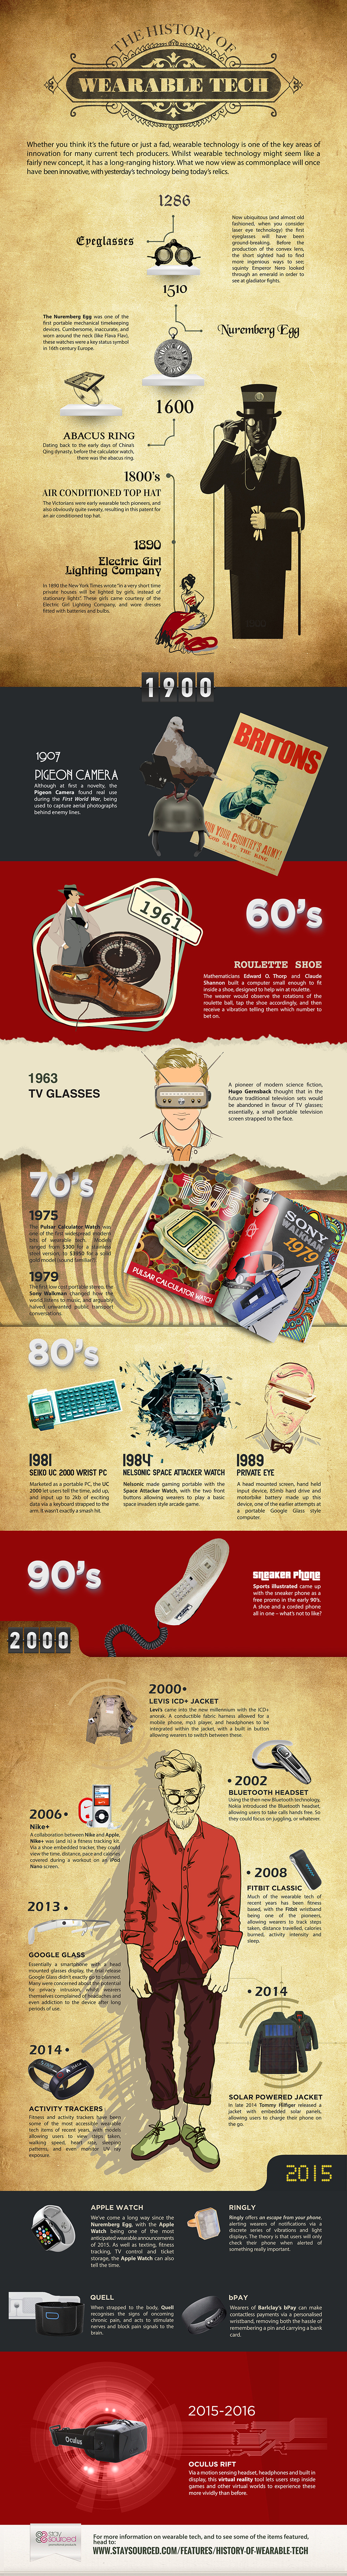 The History of Wearable Technology